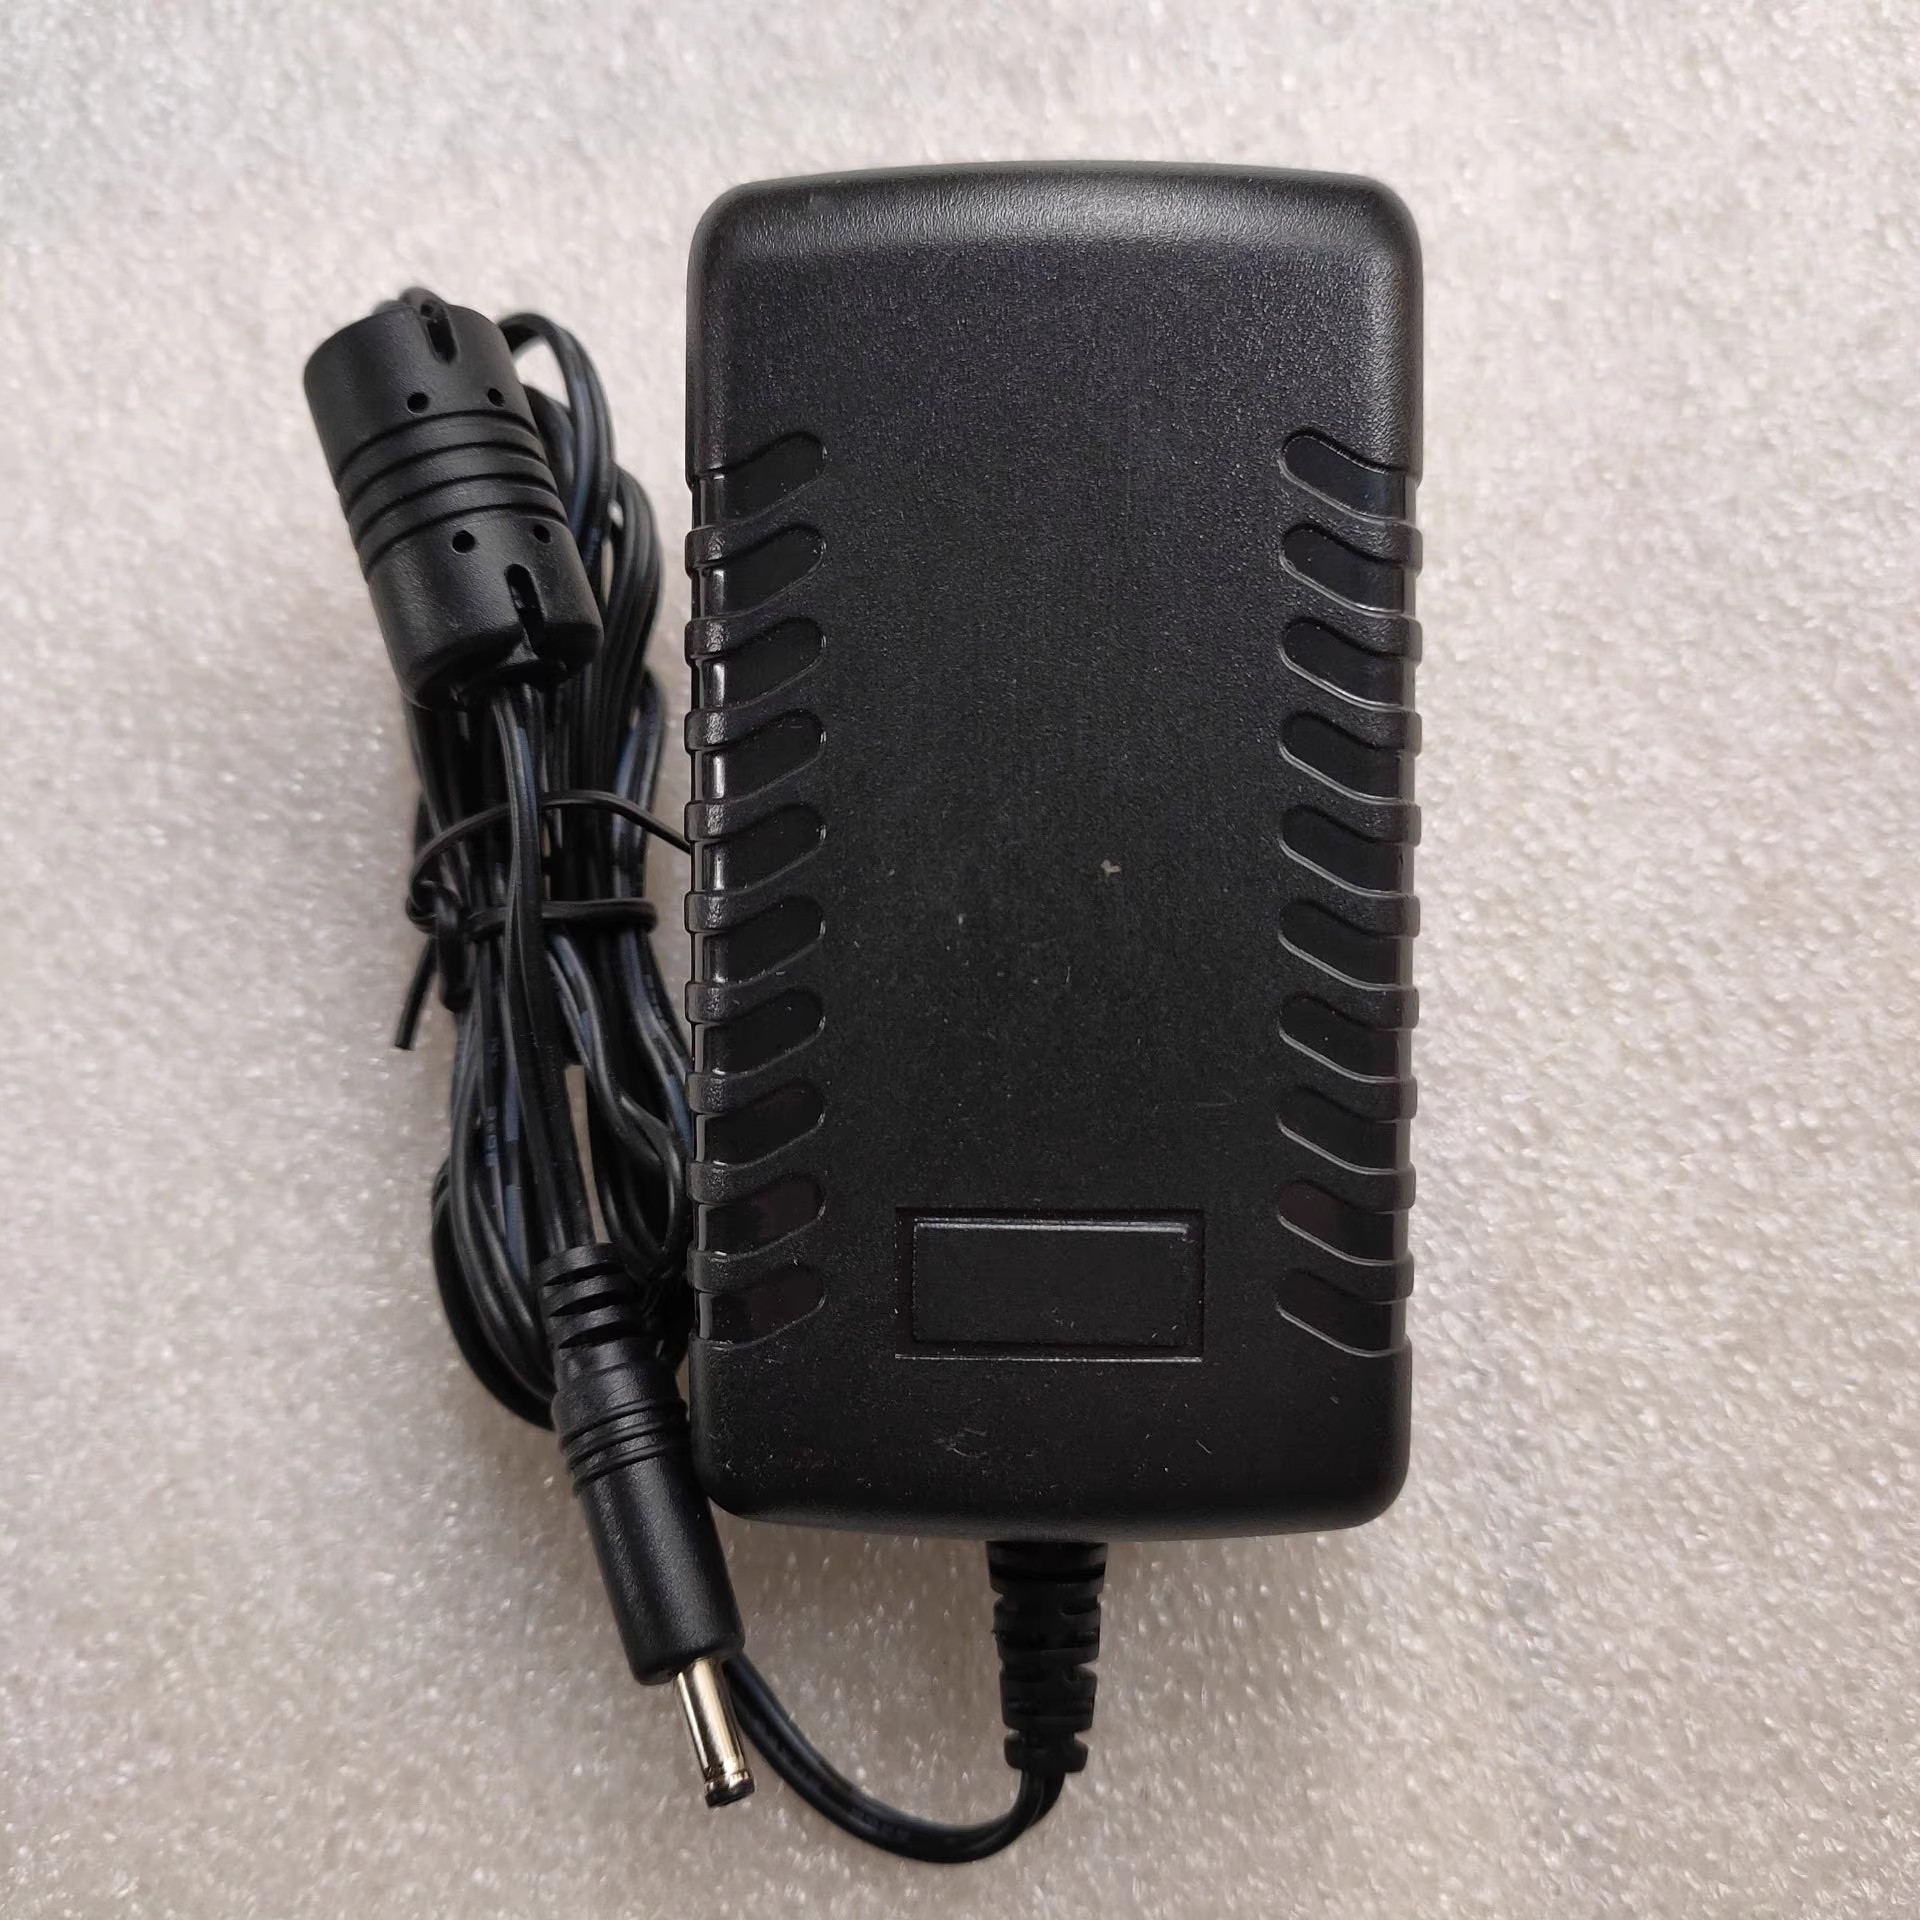 *Brand NEW* BSC 19V 2.1A AC DC ADAPTHE BSC40-190210-C POWER Supply